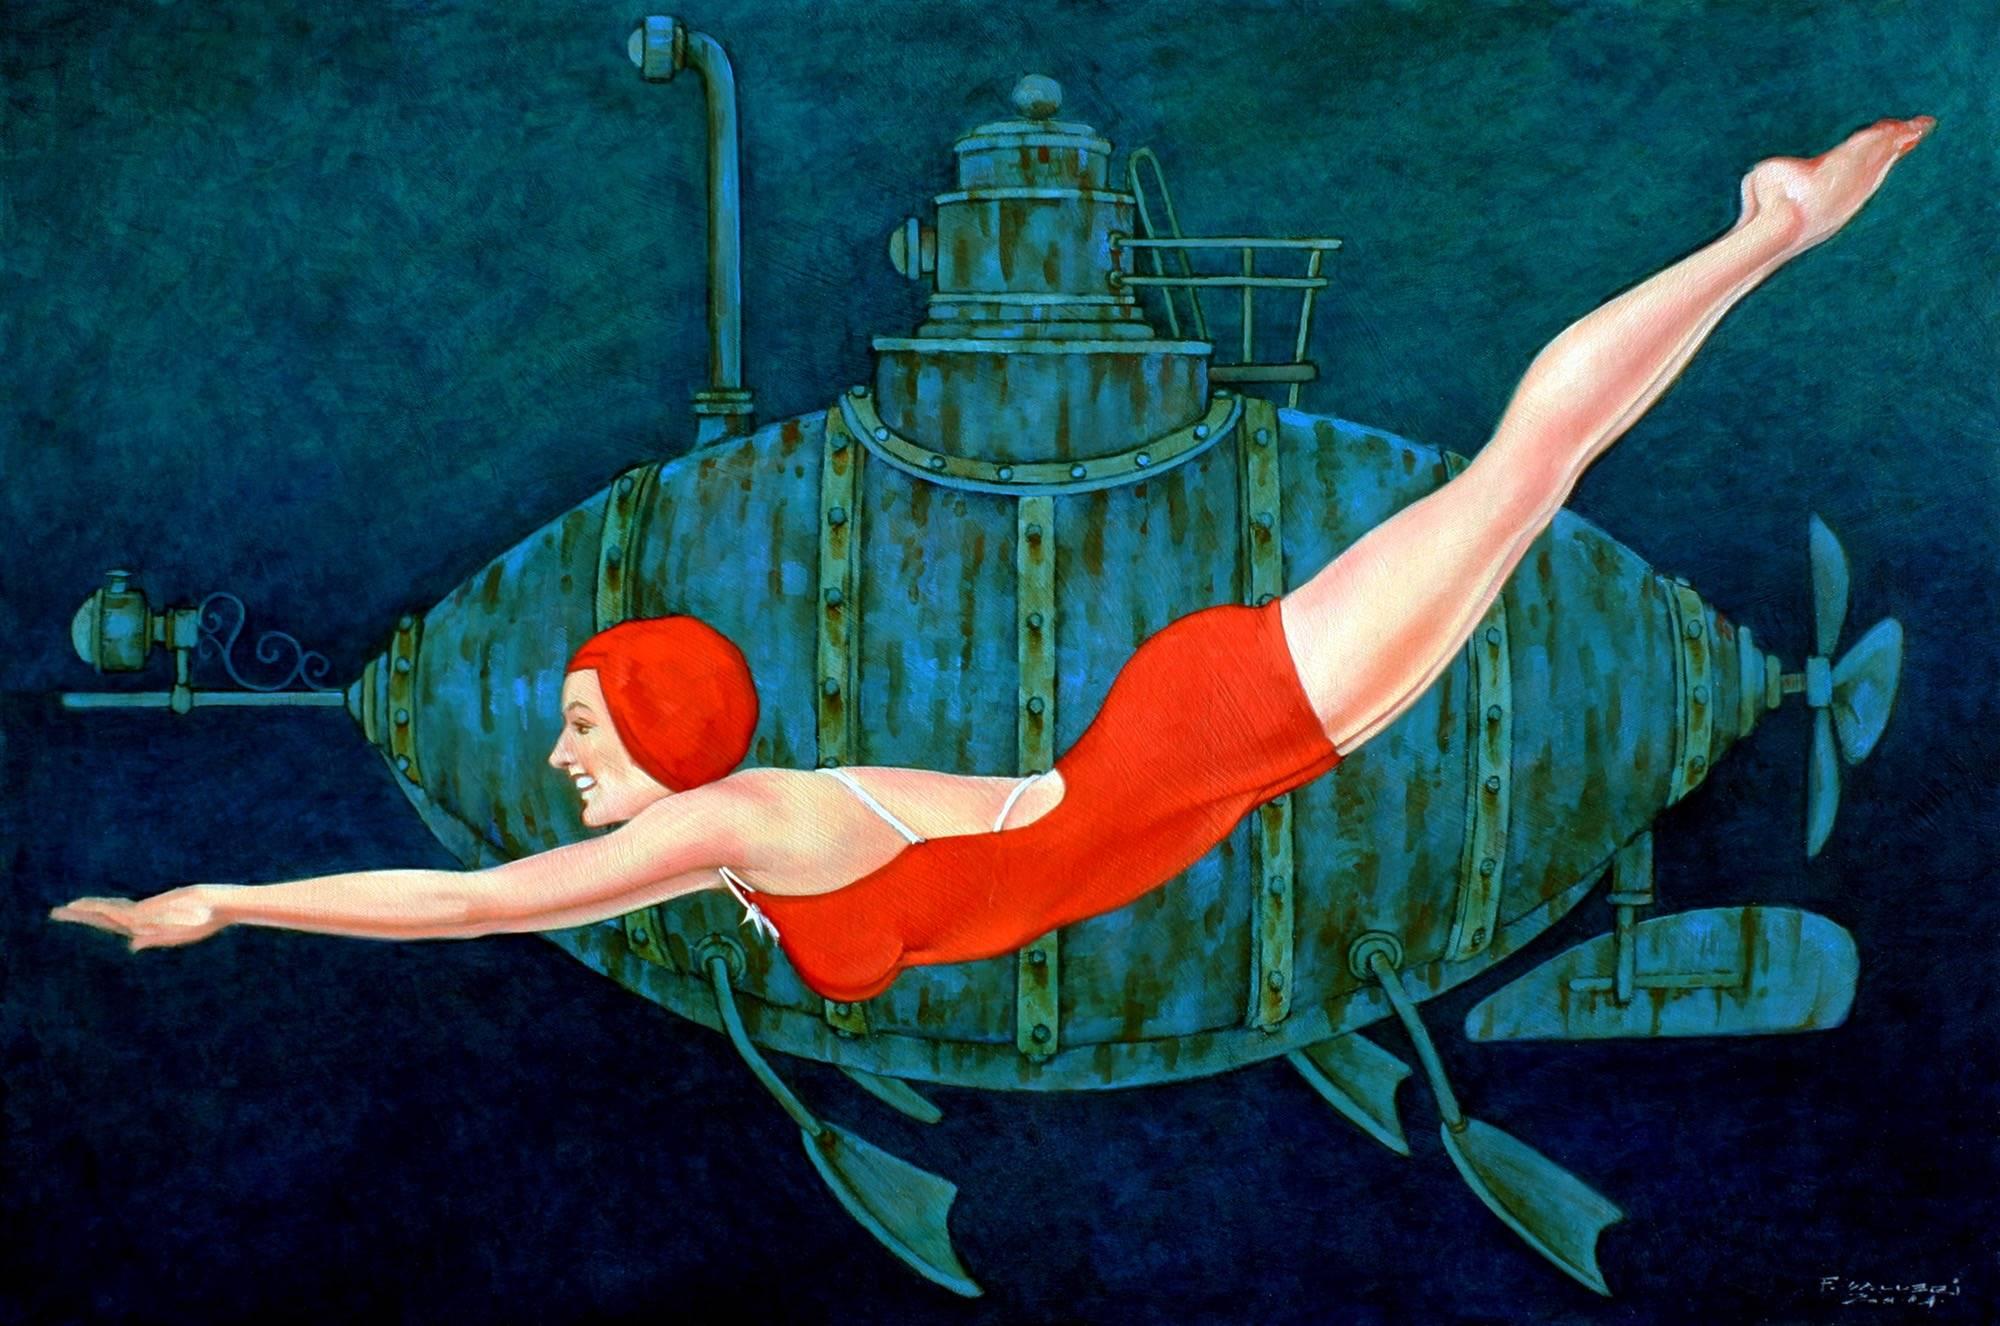 Fred Calleri Figurative Painting - "Busby Berkely" Woman in Red Bathing Suit Swimming in Deep Green with Submarine